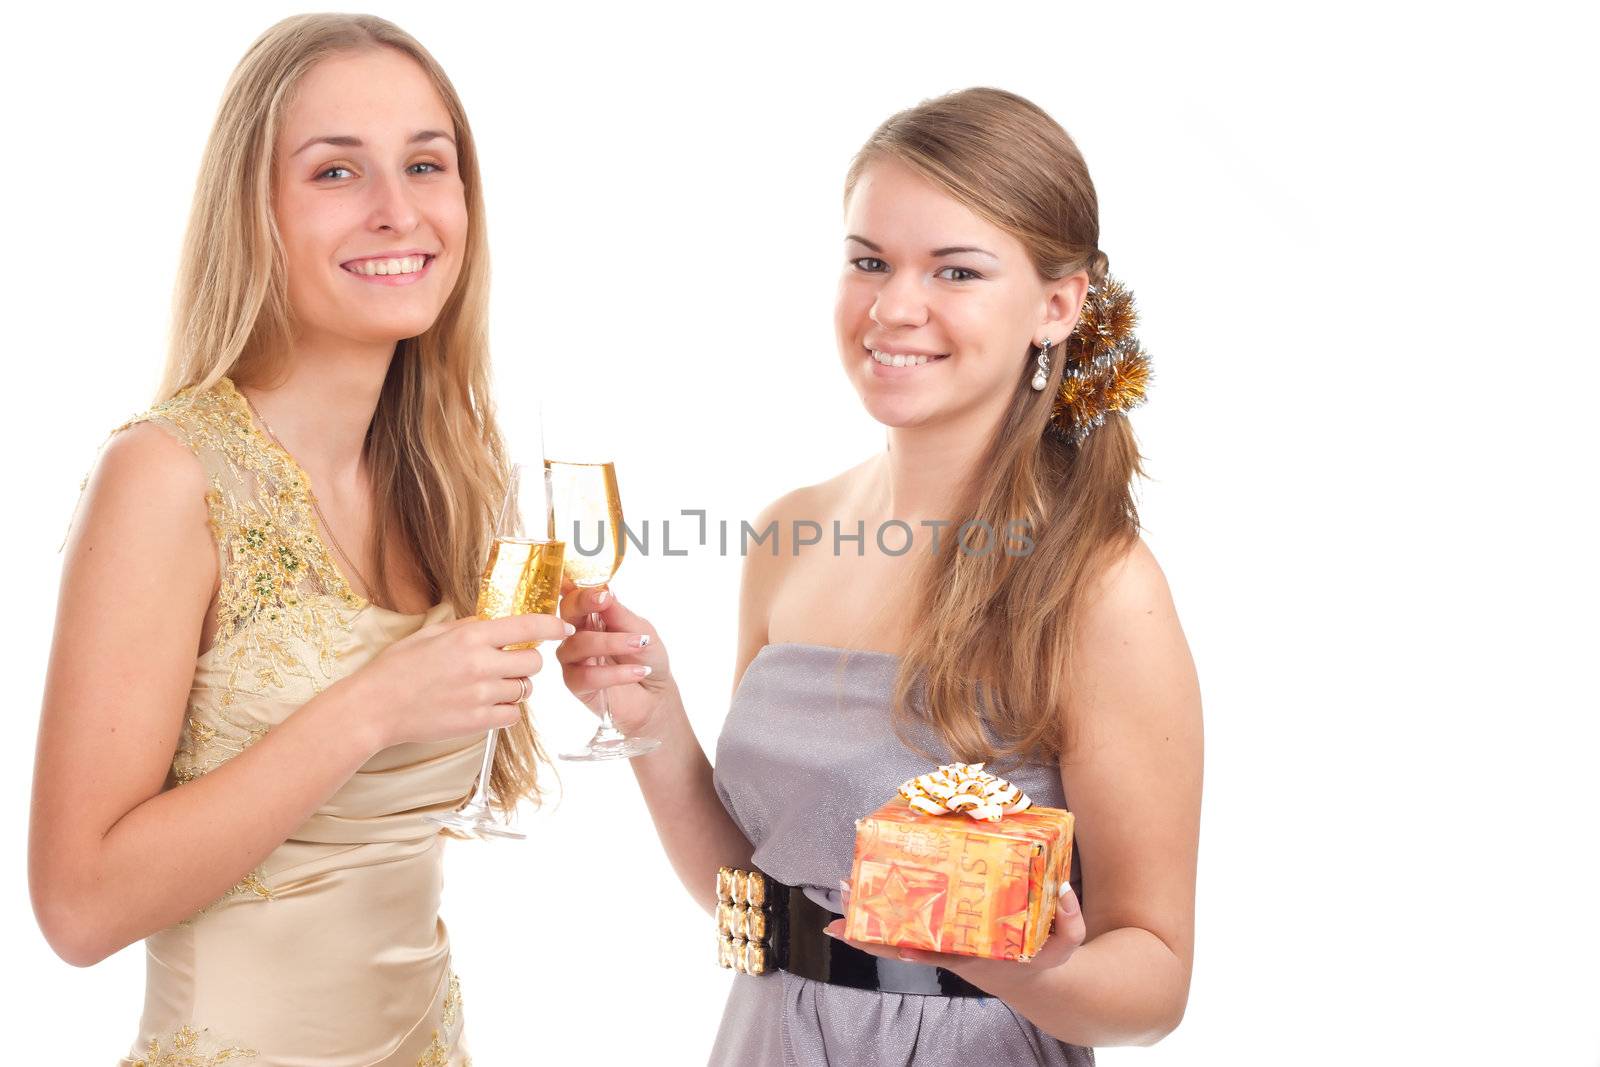 Two girls celebrate Christmas with gifts and glasses in their hands studio shooting